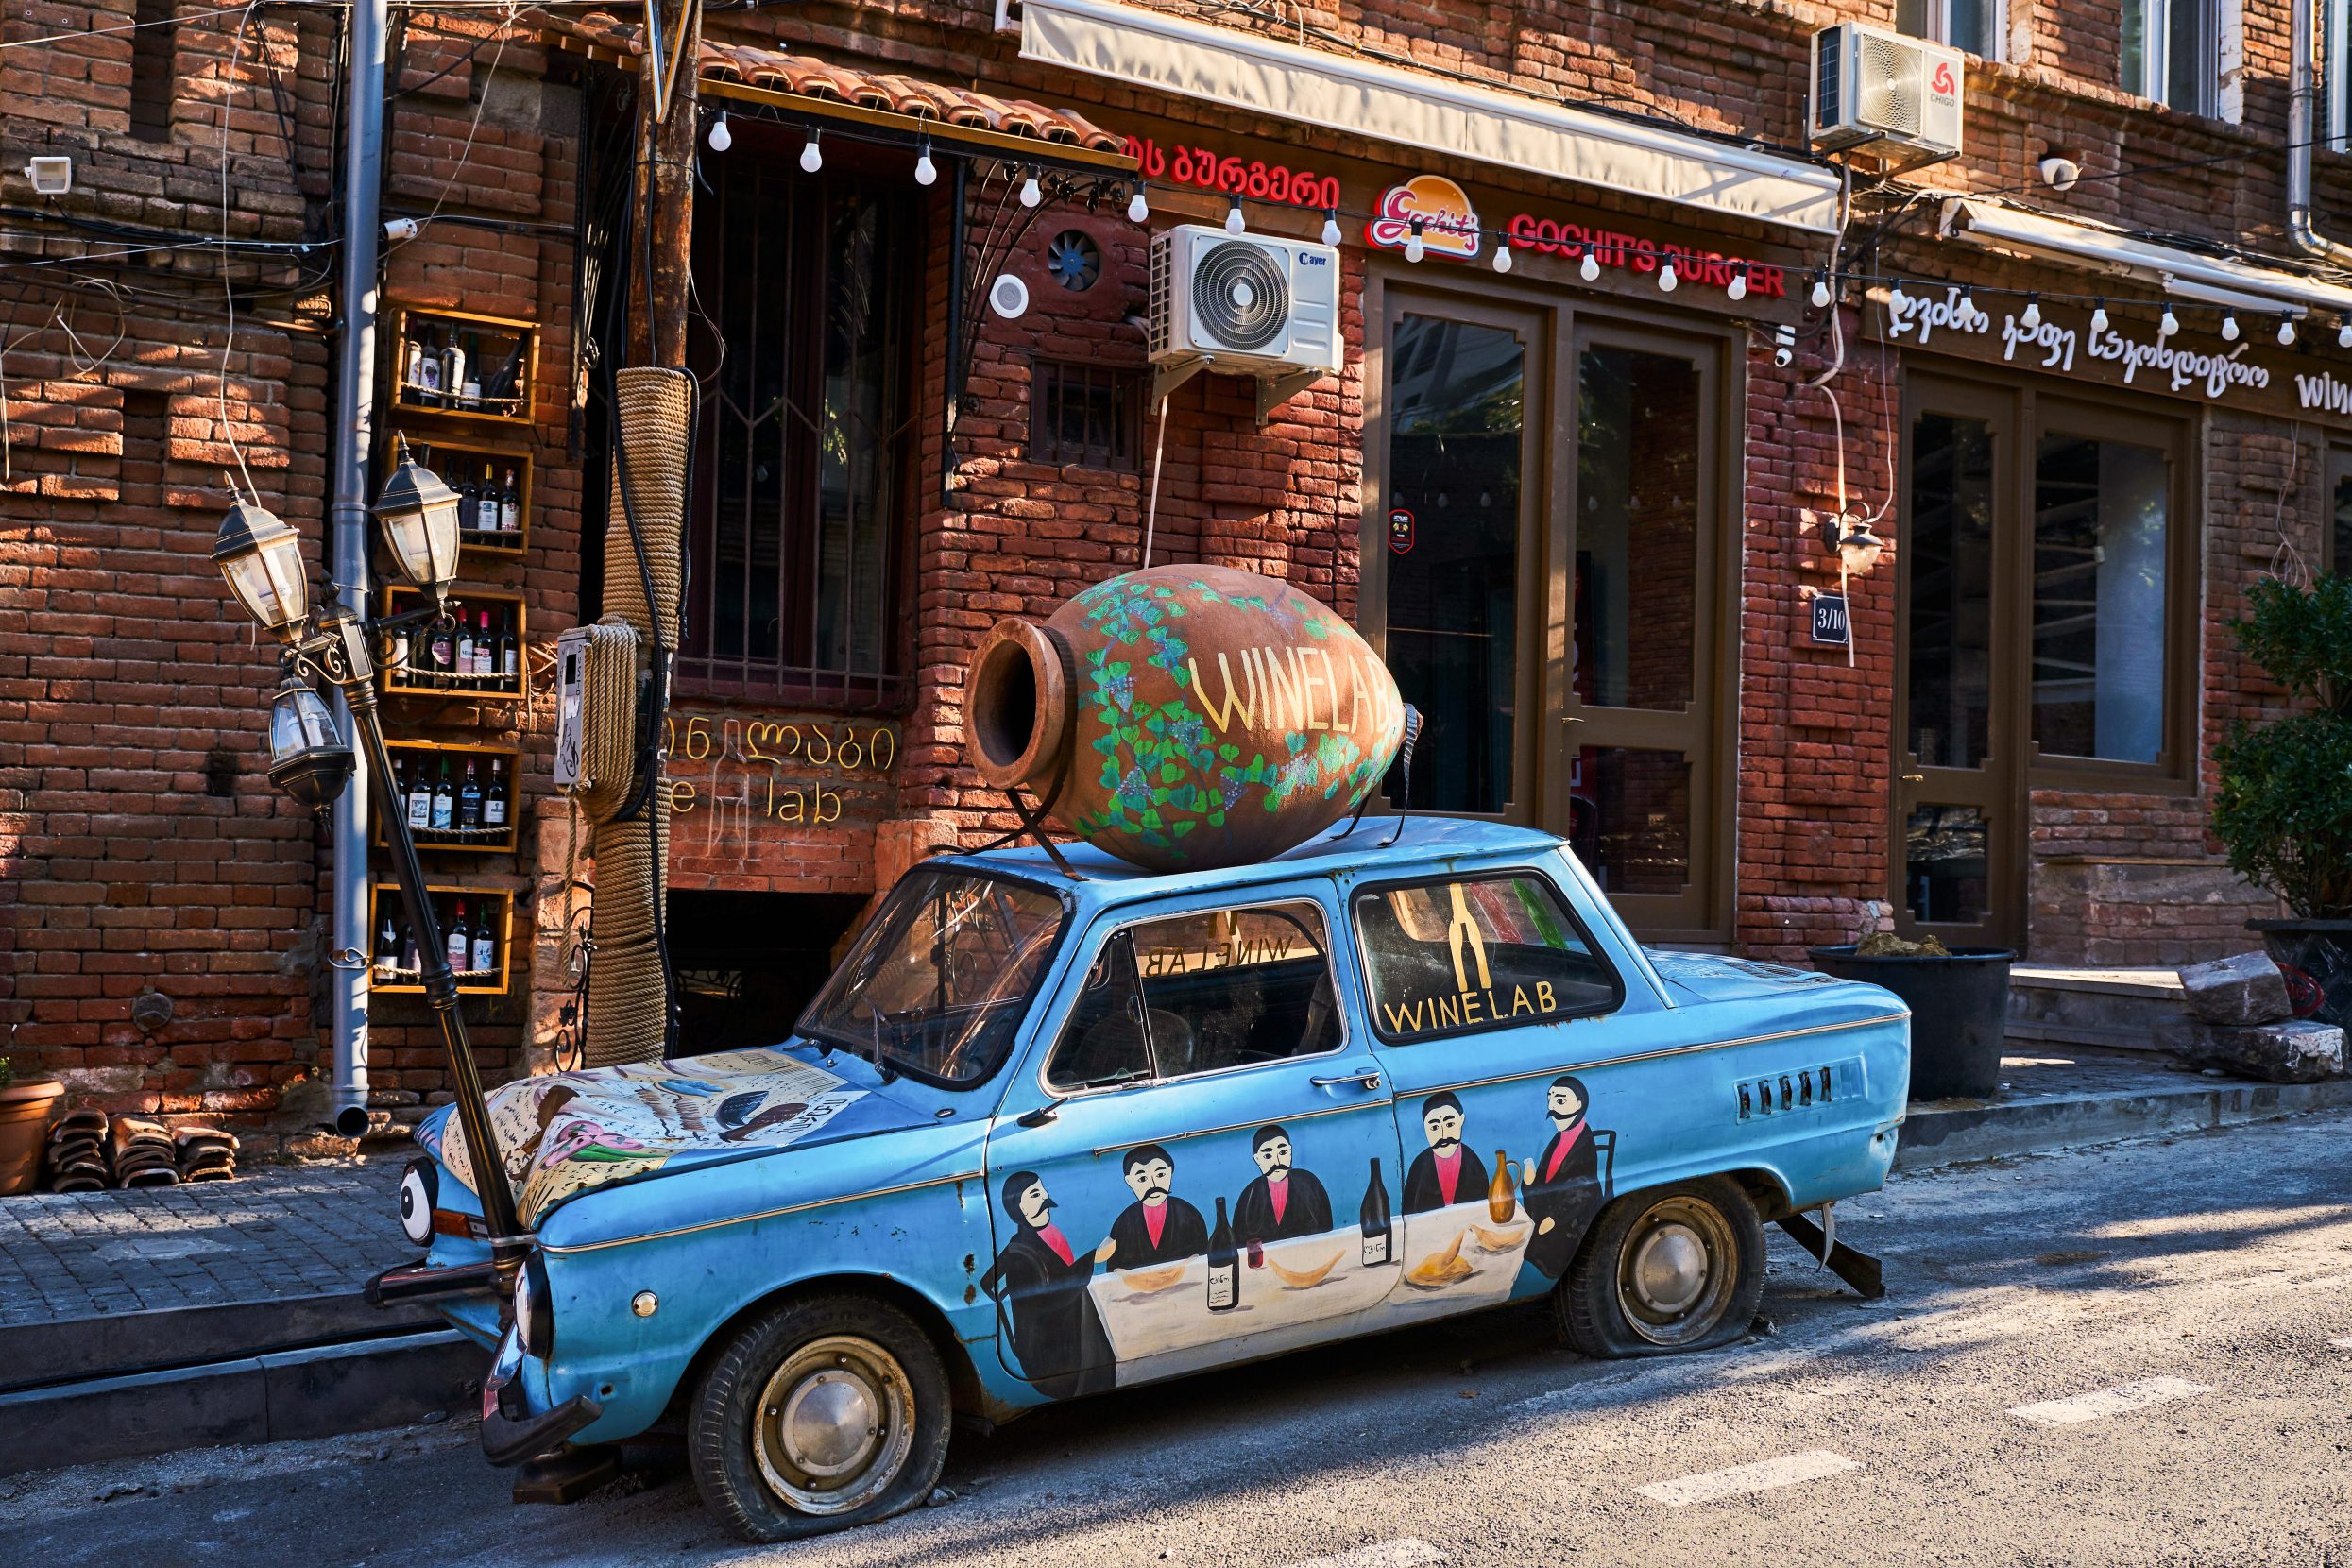 Traditional wine culture looms large in Georgian life, as encapsulated in this car decorated to promote a bar in Tbilisi. In addition to the qvevri pot on top, the billboard on wheels pays homage to native son and famed primitivist painter Niko Pirosmani, who frequently depicted scenes of rural life centered on wine traditions. Photo: Tuul and Bruno Morandi/Alamy.